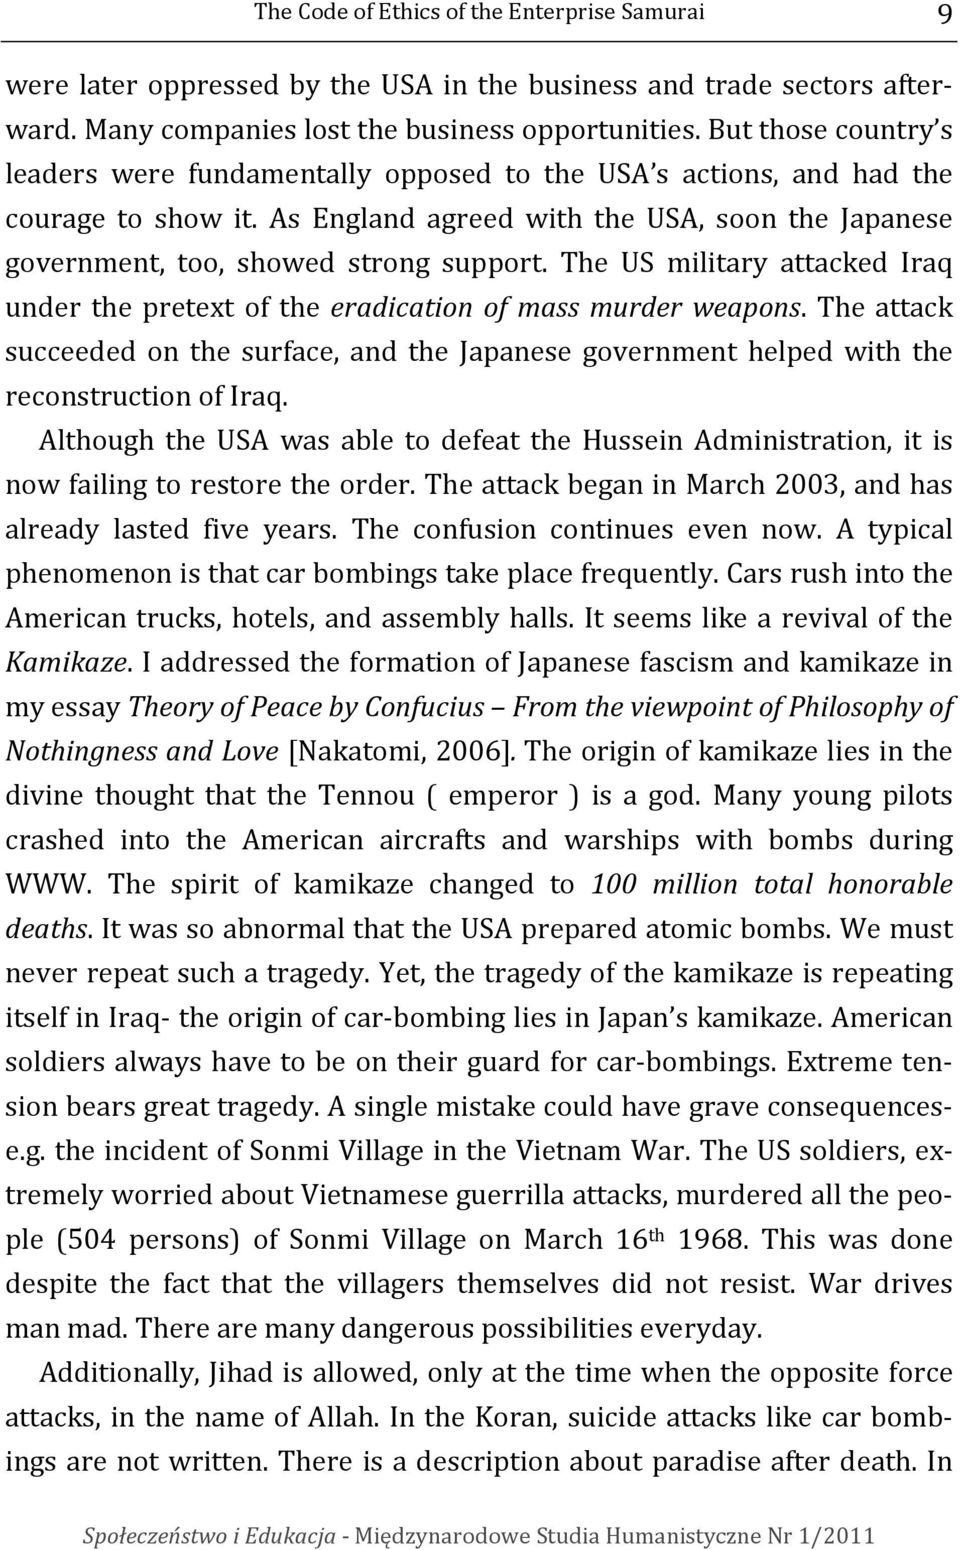 The US military attacked Iraq under the pretext of the eradication of mass murder weapons. The attack succeeded on the surface, and the Japanese government helped with the reconstruction of Iraq.